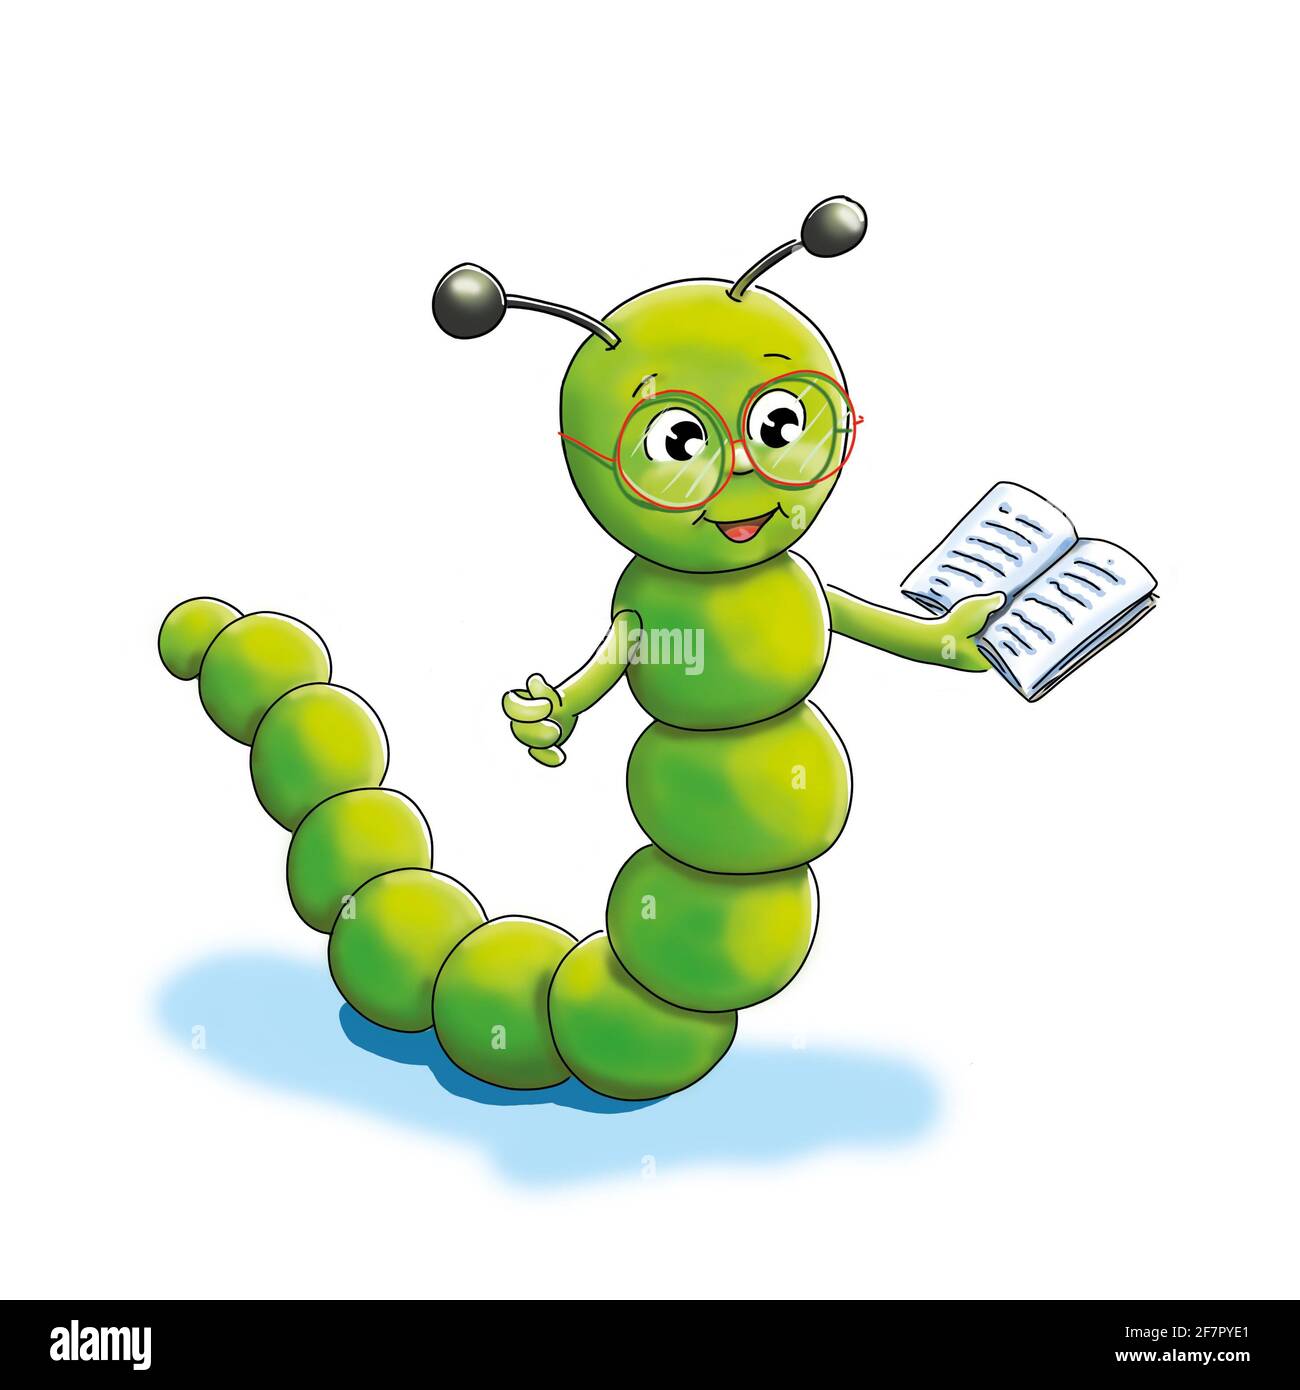 Baldwin, the green bookworm with red glasses on his nose, is holding a book and has his arms outstretched. White background. Cute children's illustrat Stock Photo